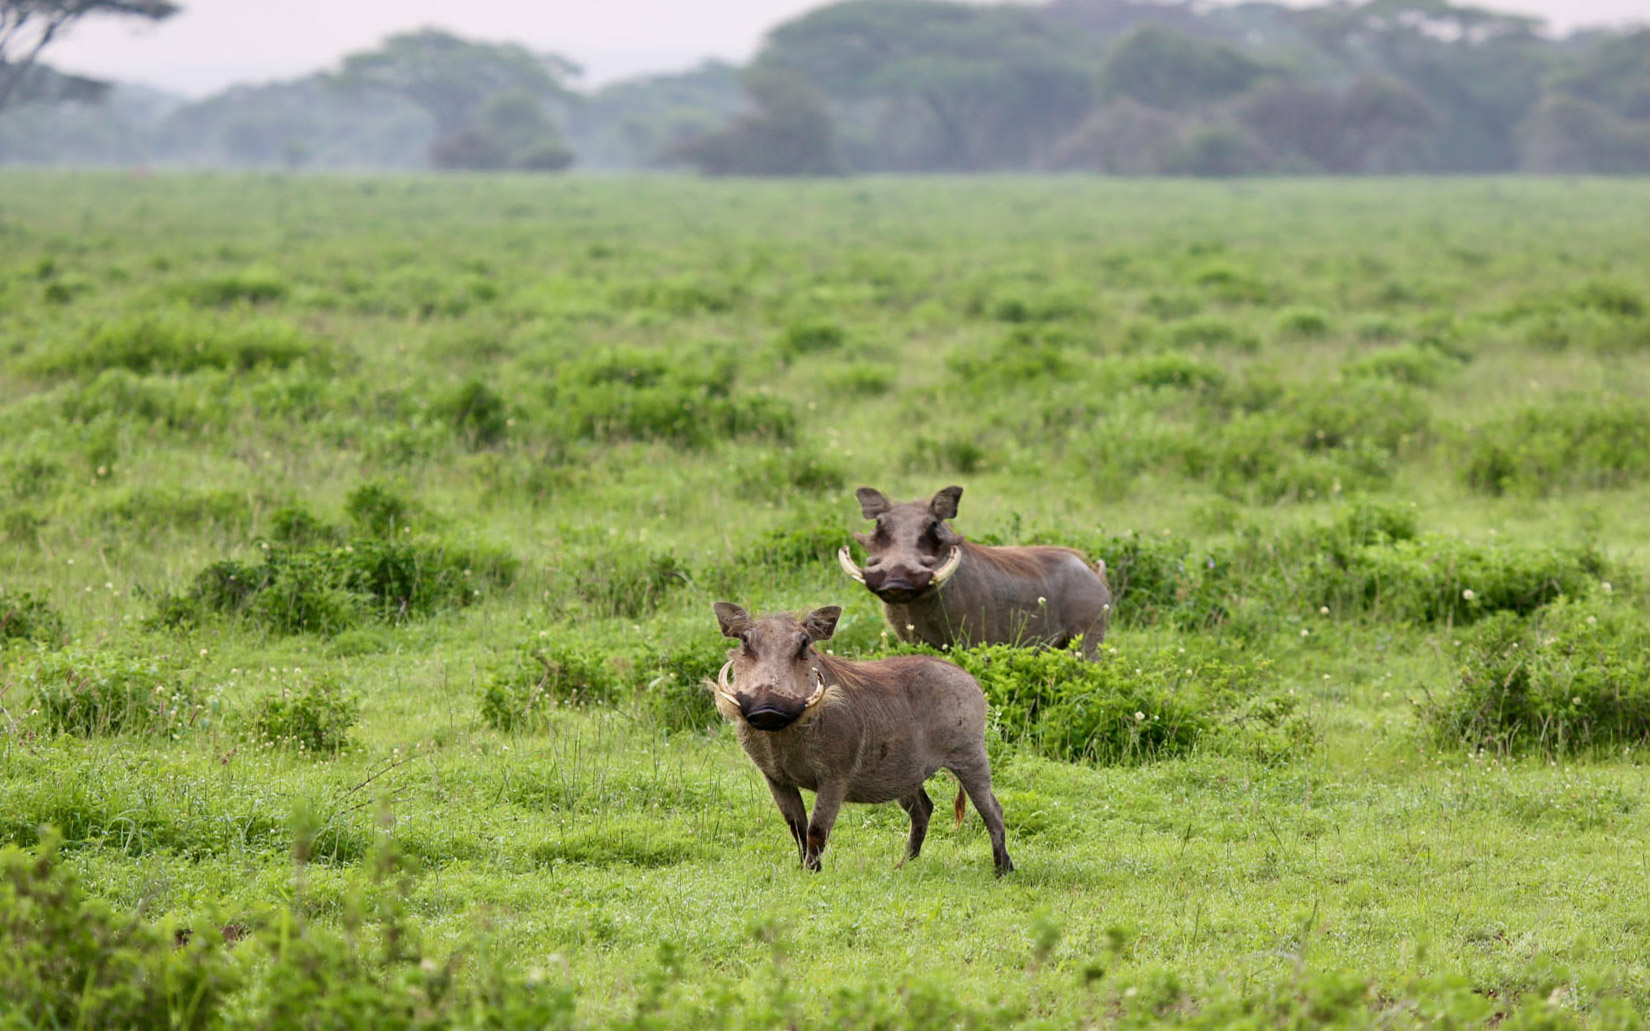 Everywhere you turn, there's another warthog 